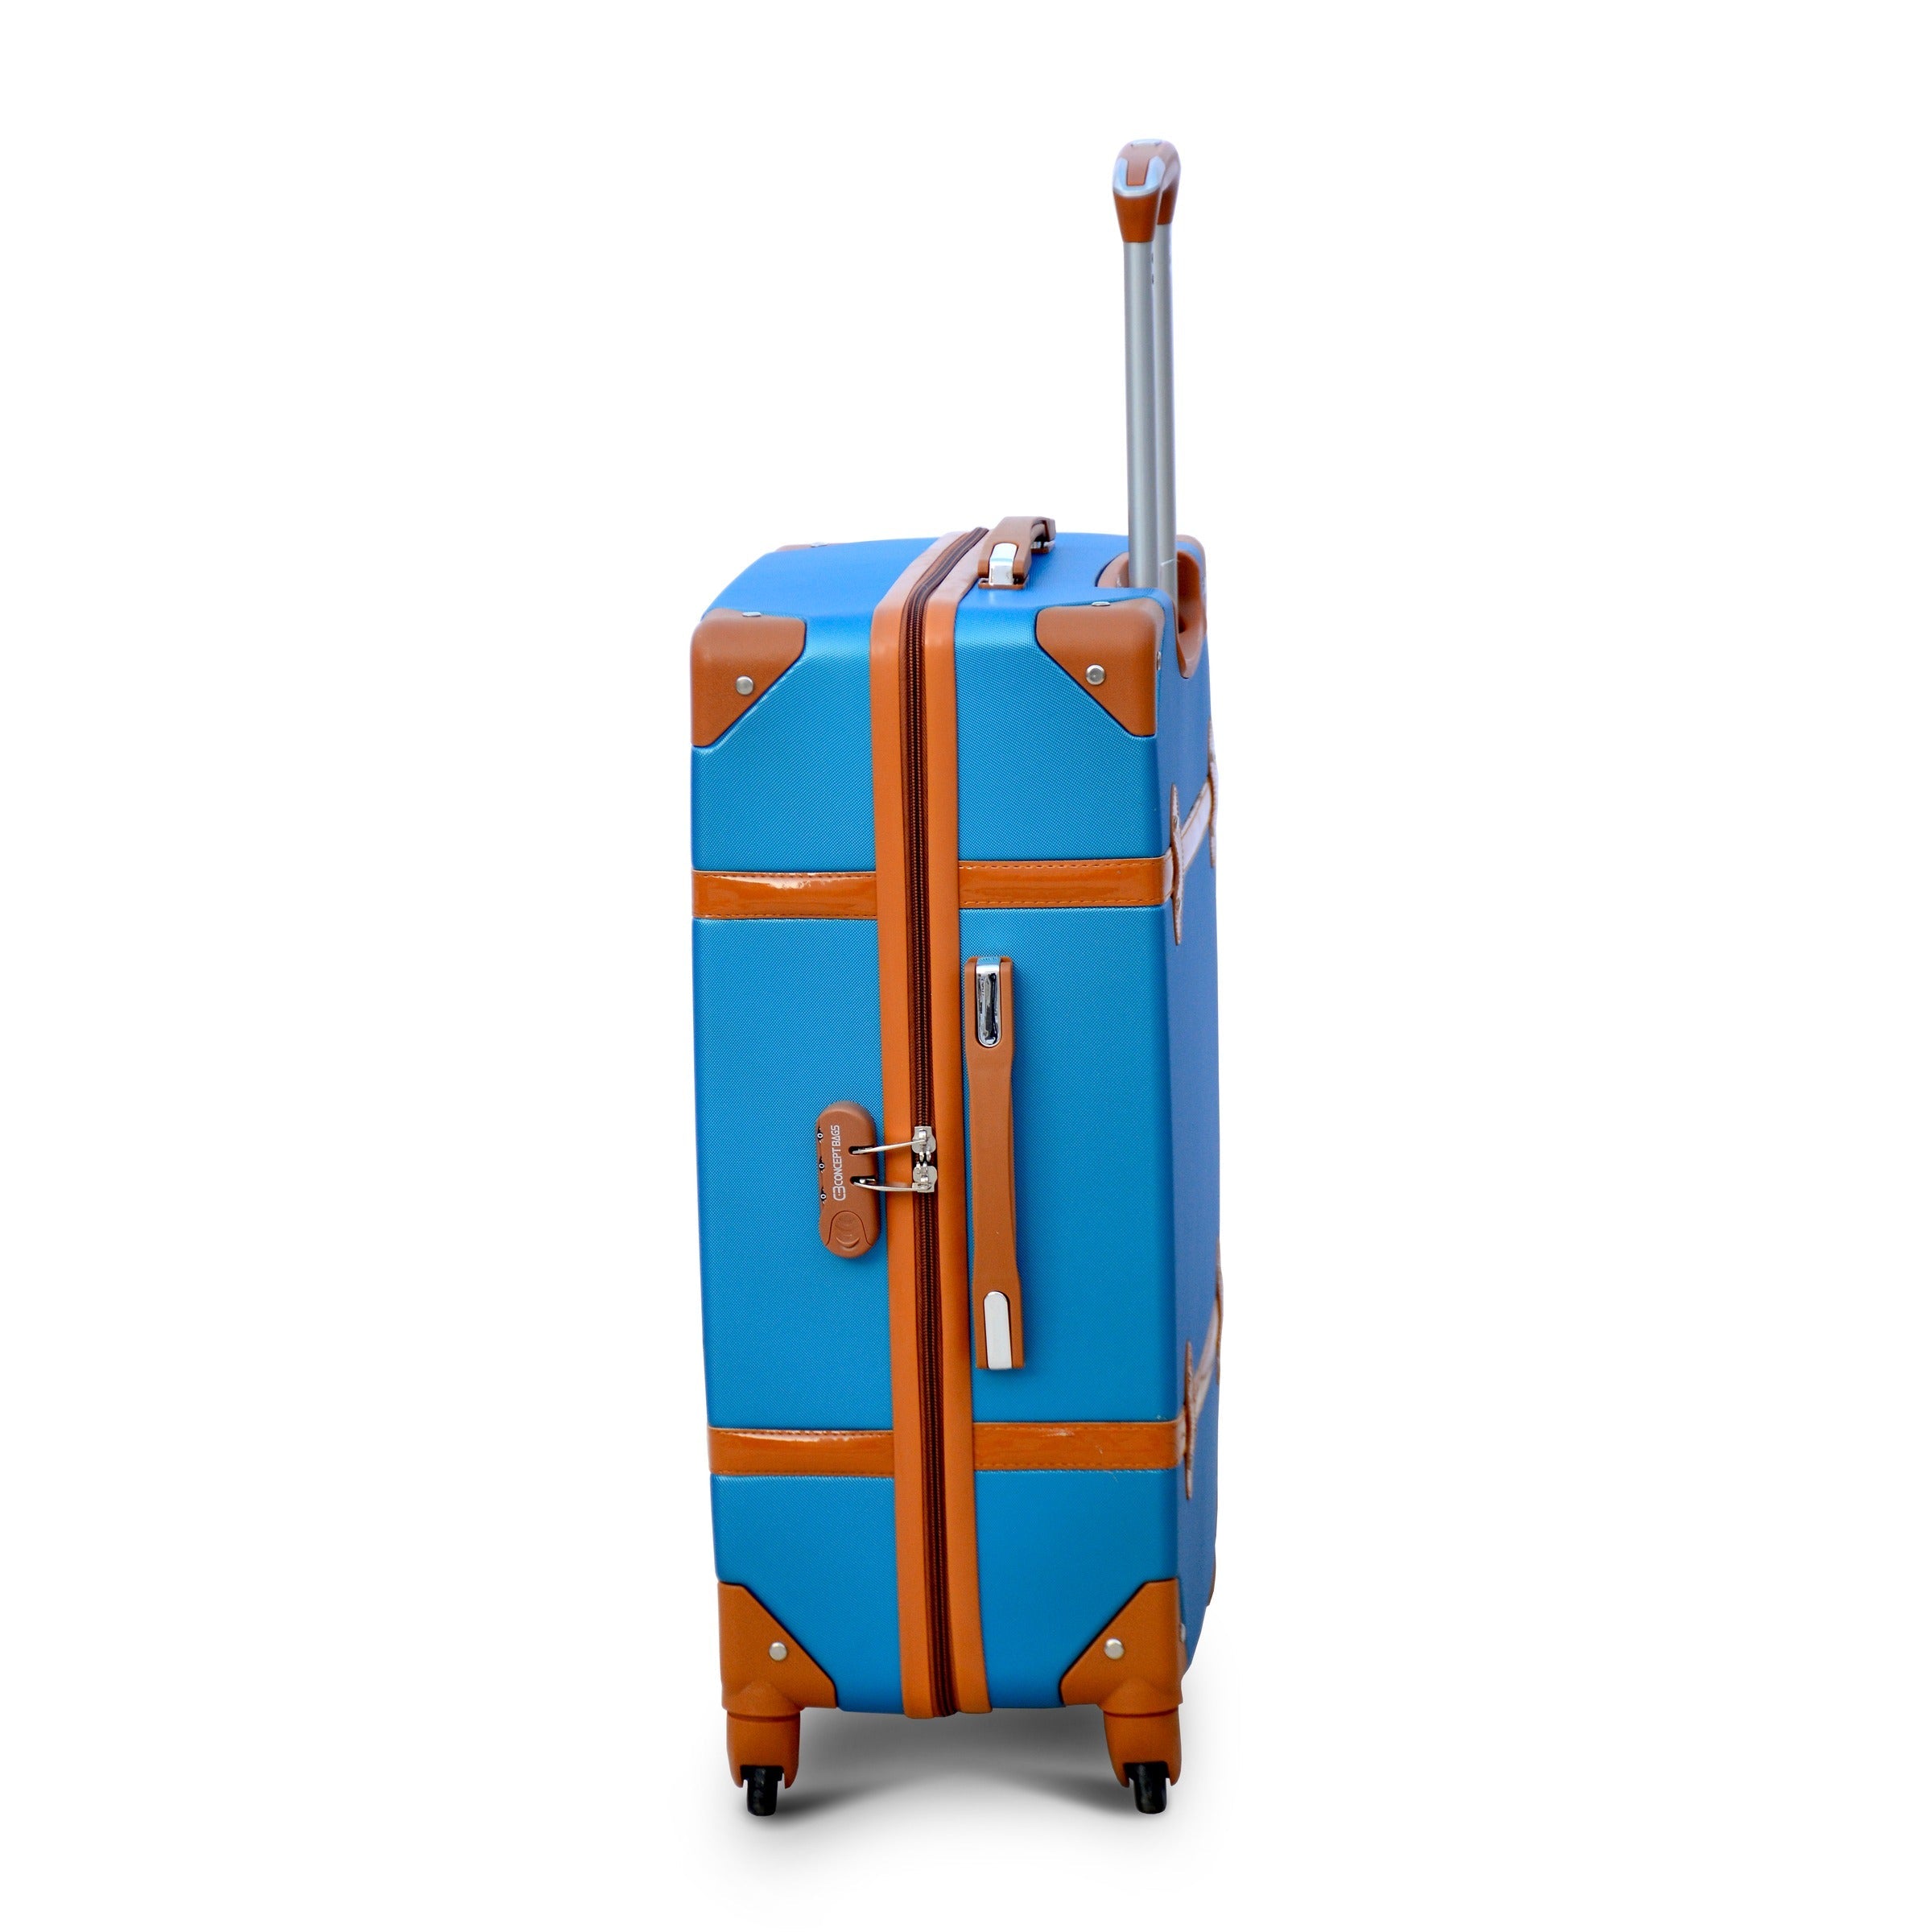 Corner Guard Lightweight ABS Luggage | Hard Case Trolley Bag | 24 Inches | Blue Colour